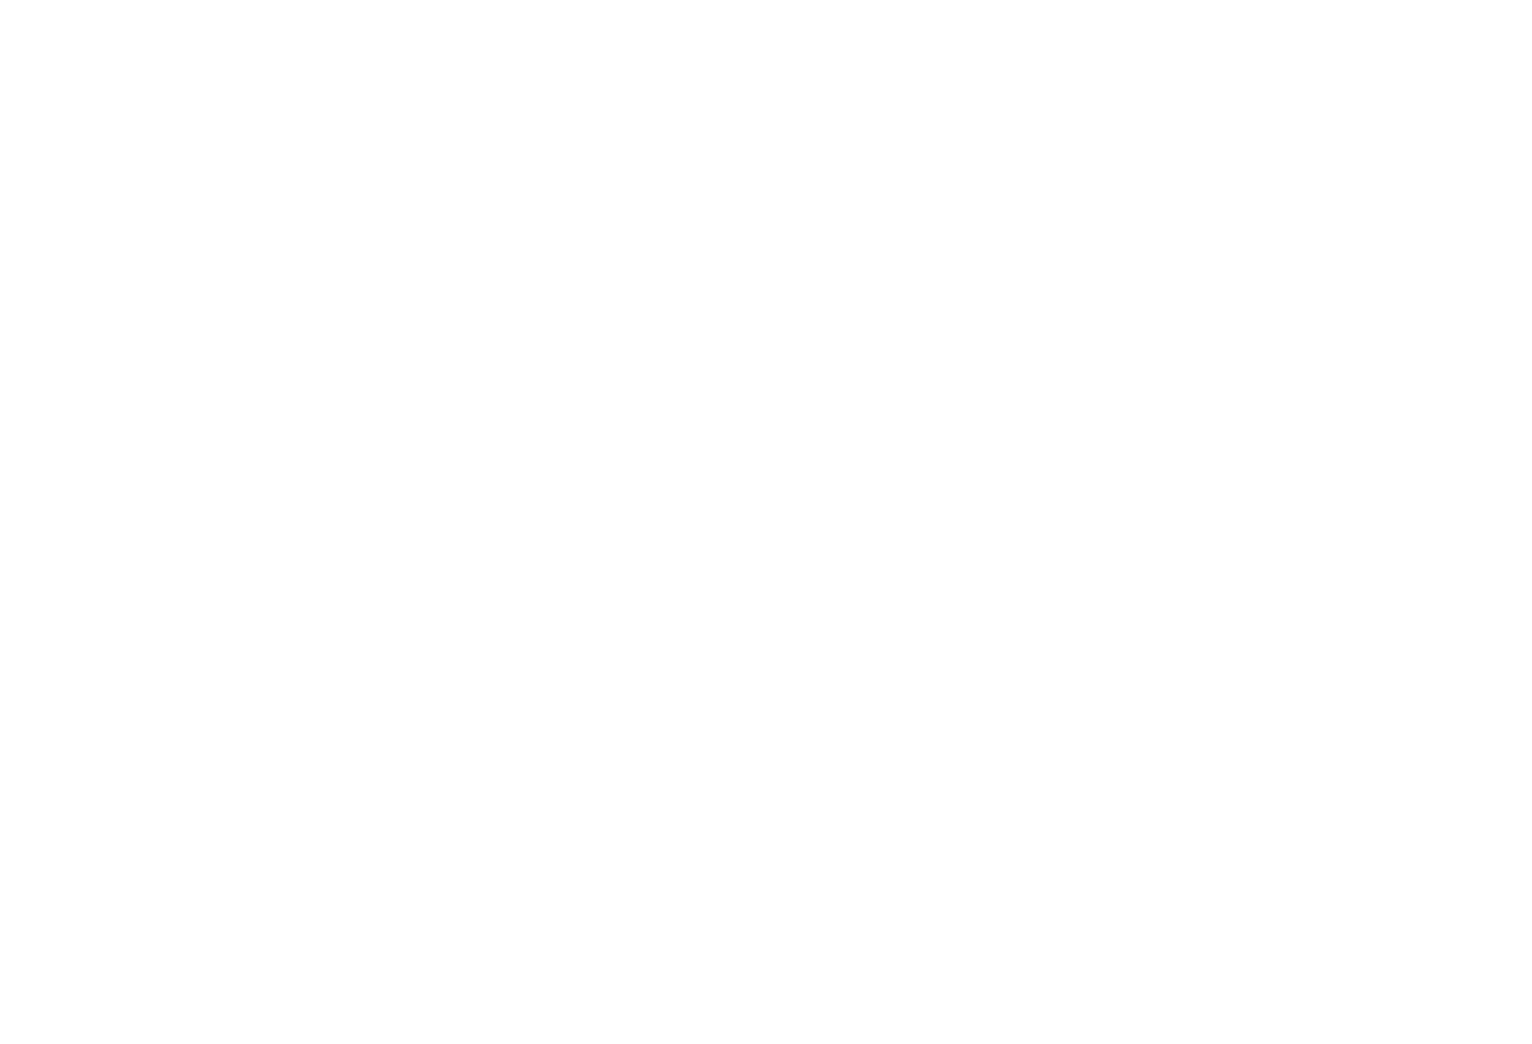 The Oncology Institute logo large for dark backgrounds (transparent PNG)